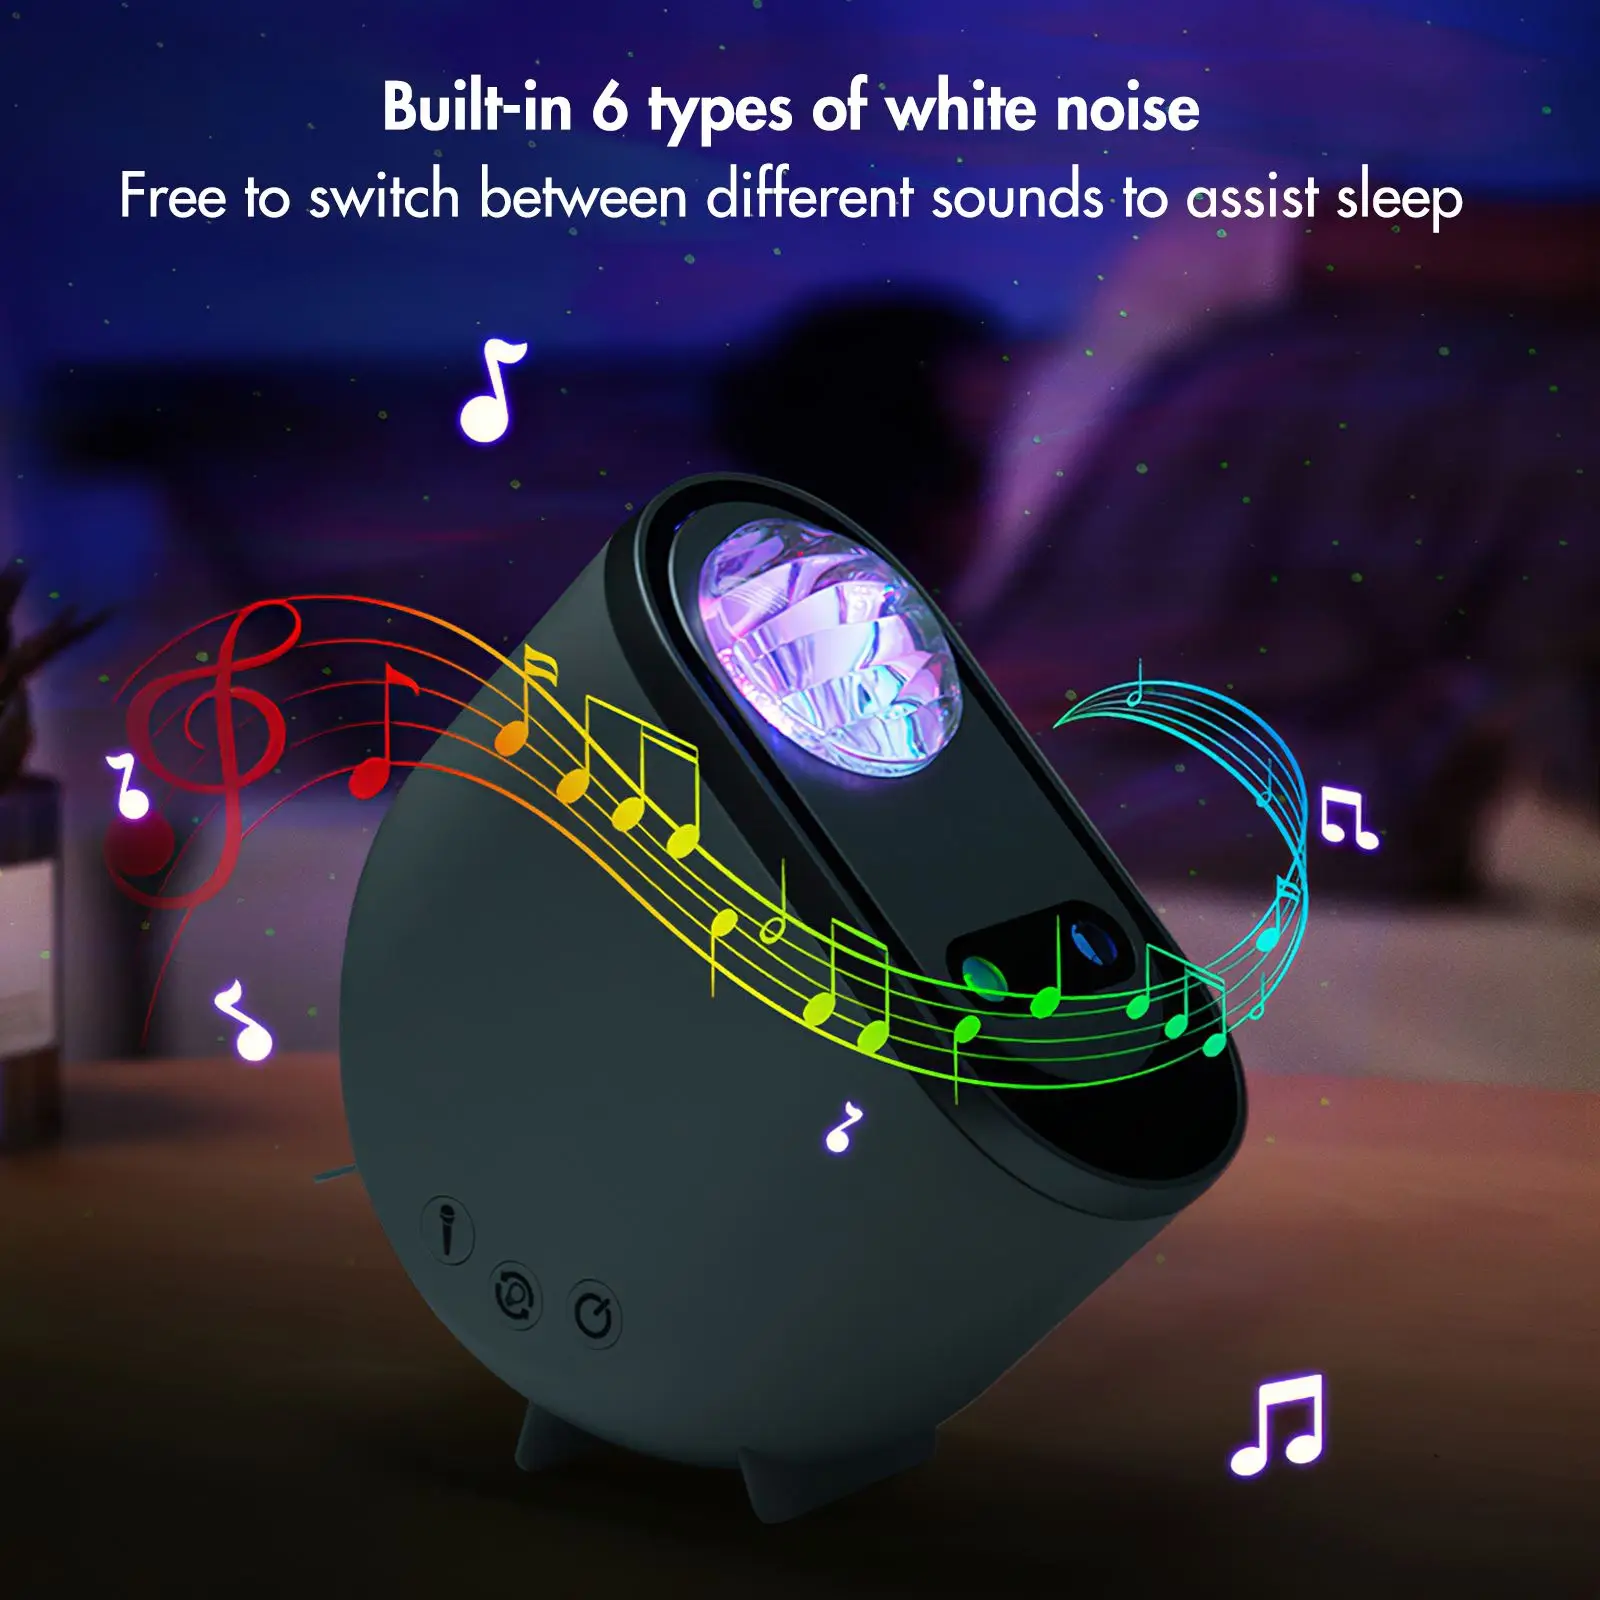 Adjustable Starlight Projectors With Remote Control Timing Function Atmosphere Ceiling Night Light Decoration Luminaires Gift adjustable starlight projectors with remote control timing function atmosphere ceiling night light decoration luminaires gift